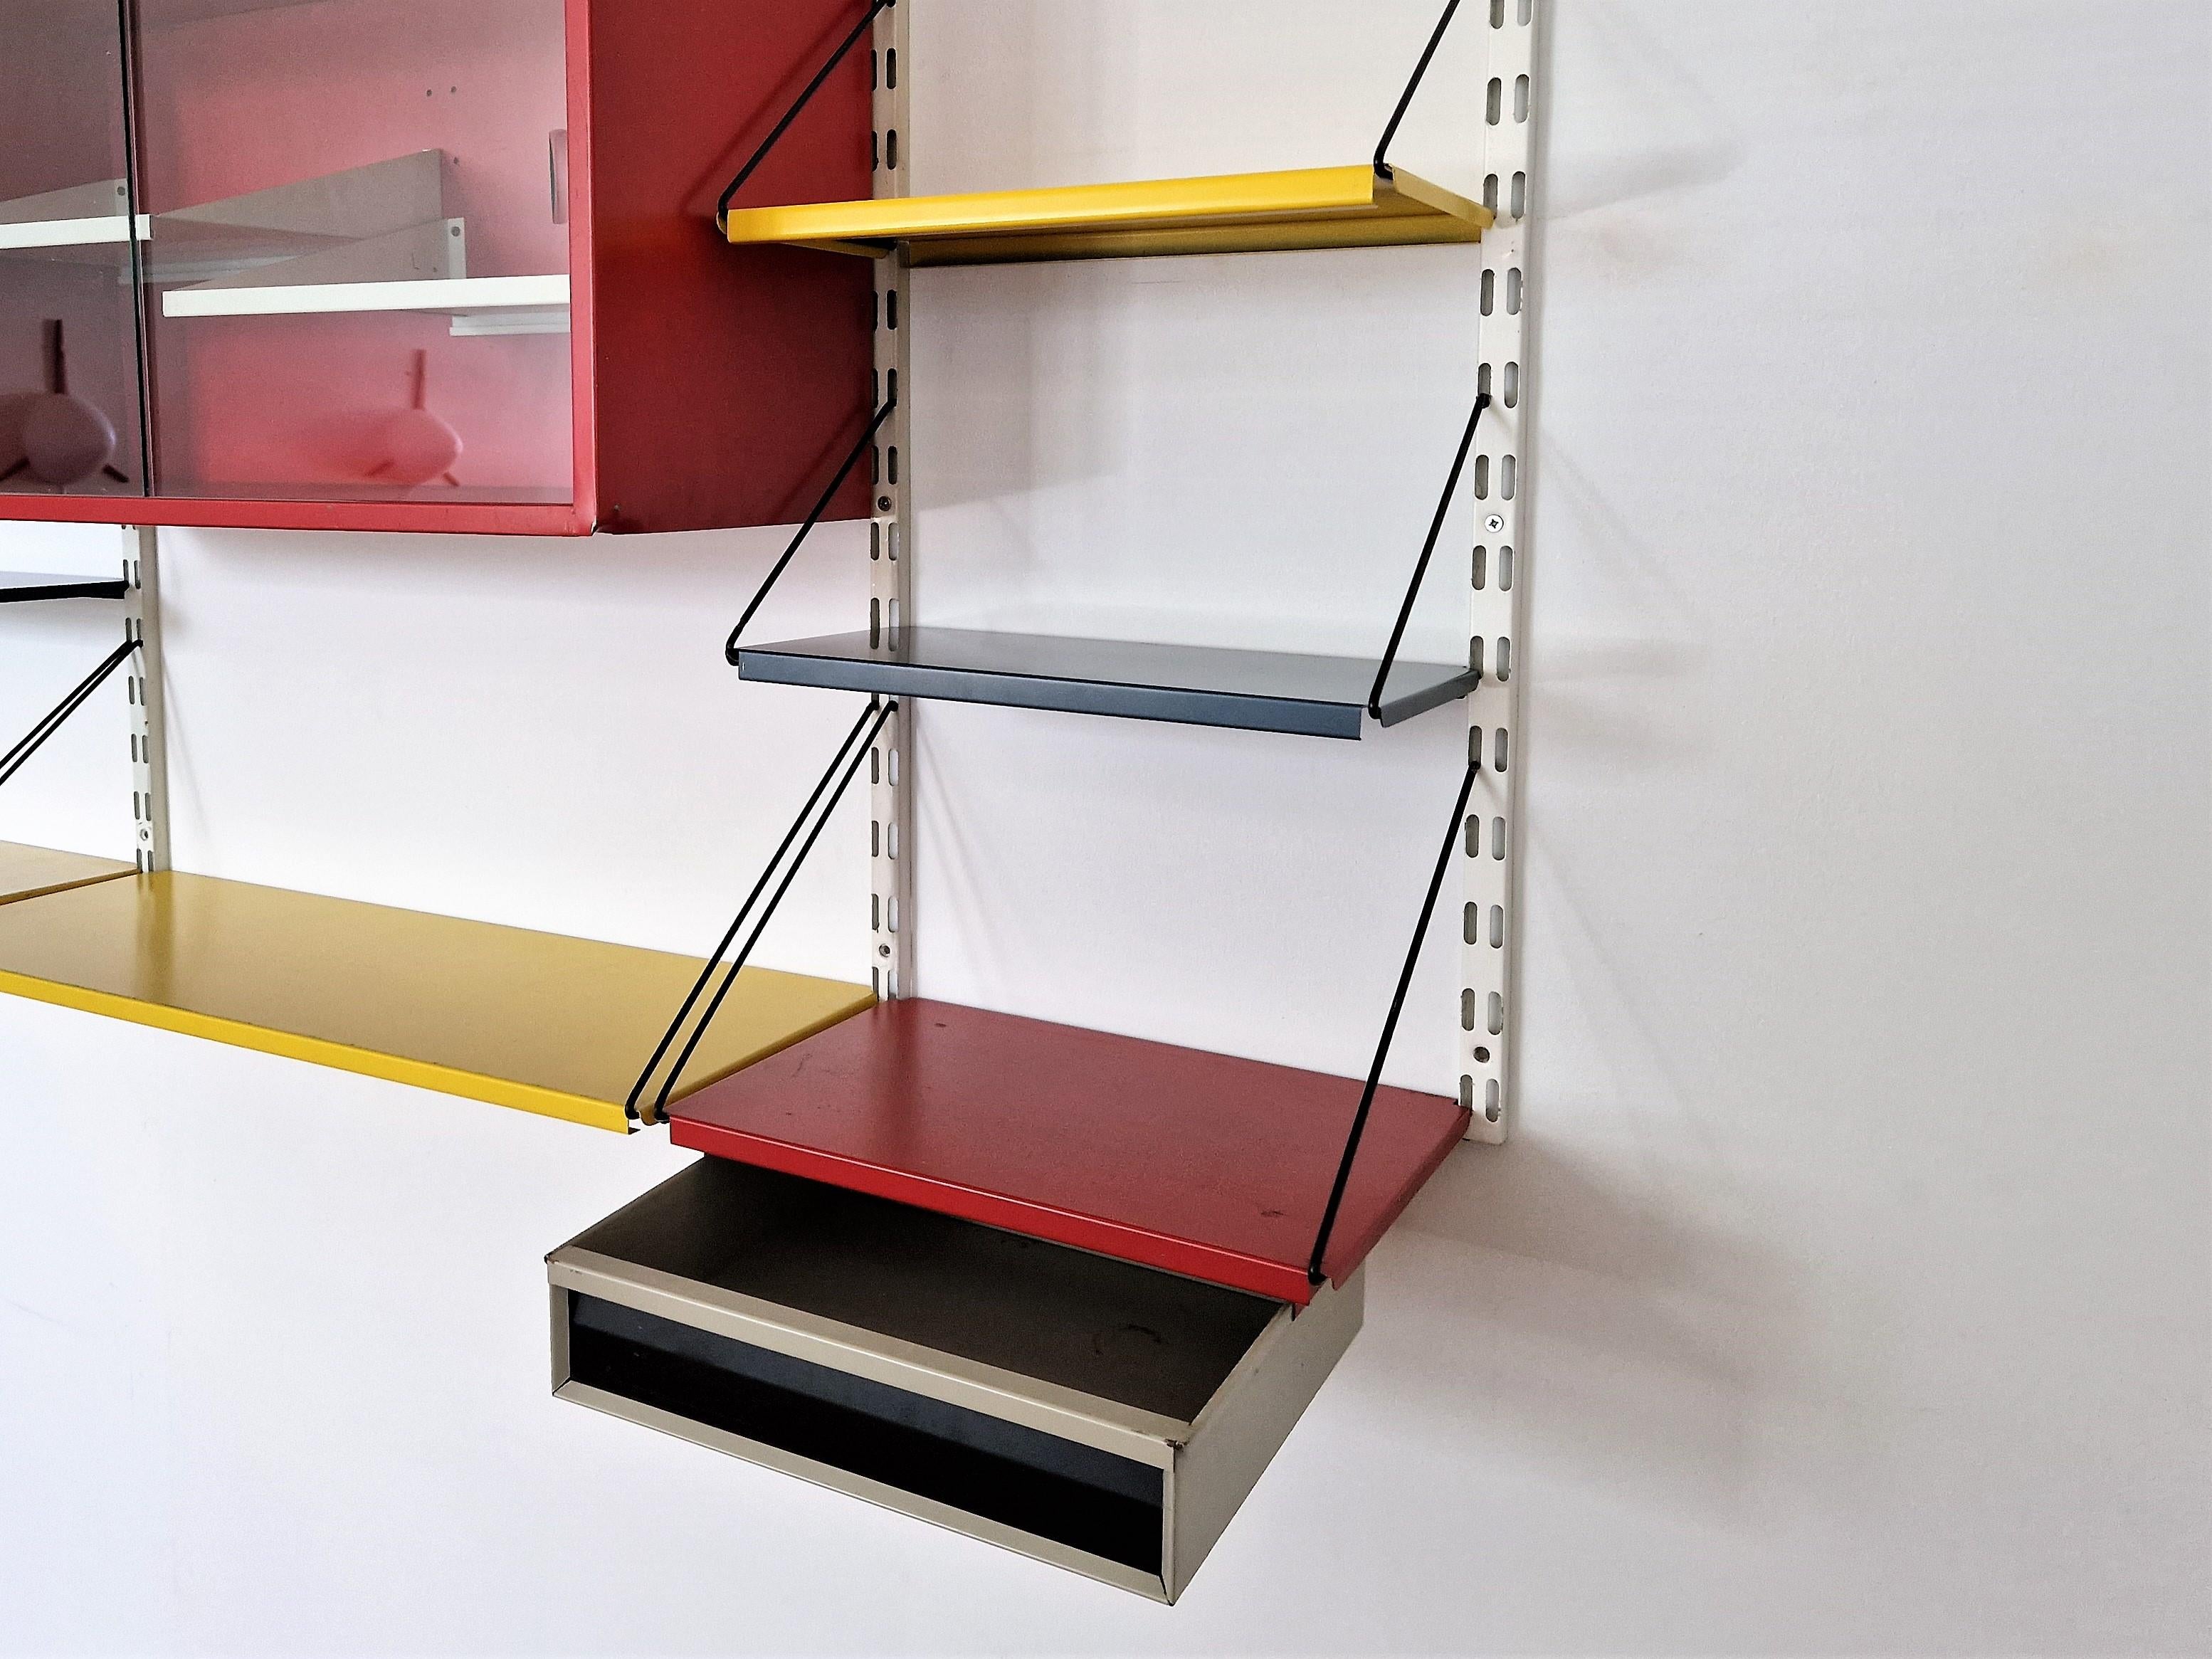 Metal Wall Unit in Red, Yellow and Blue by Tjerk Rijenga for Pilastro, 1950's For Sale 1